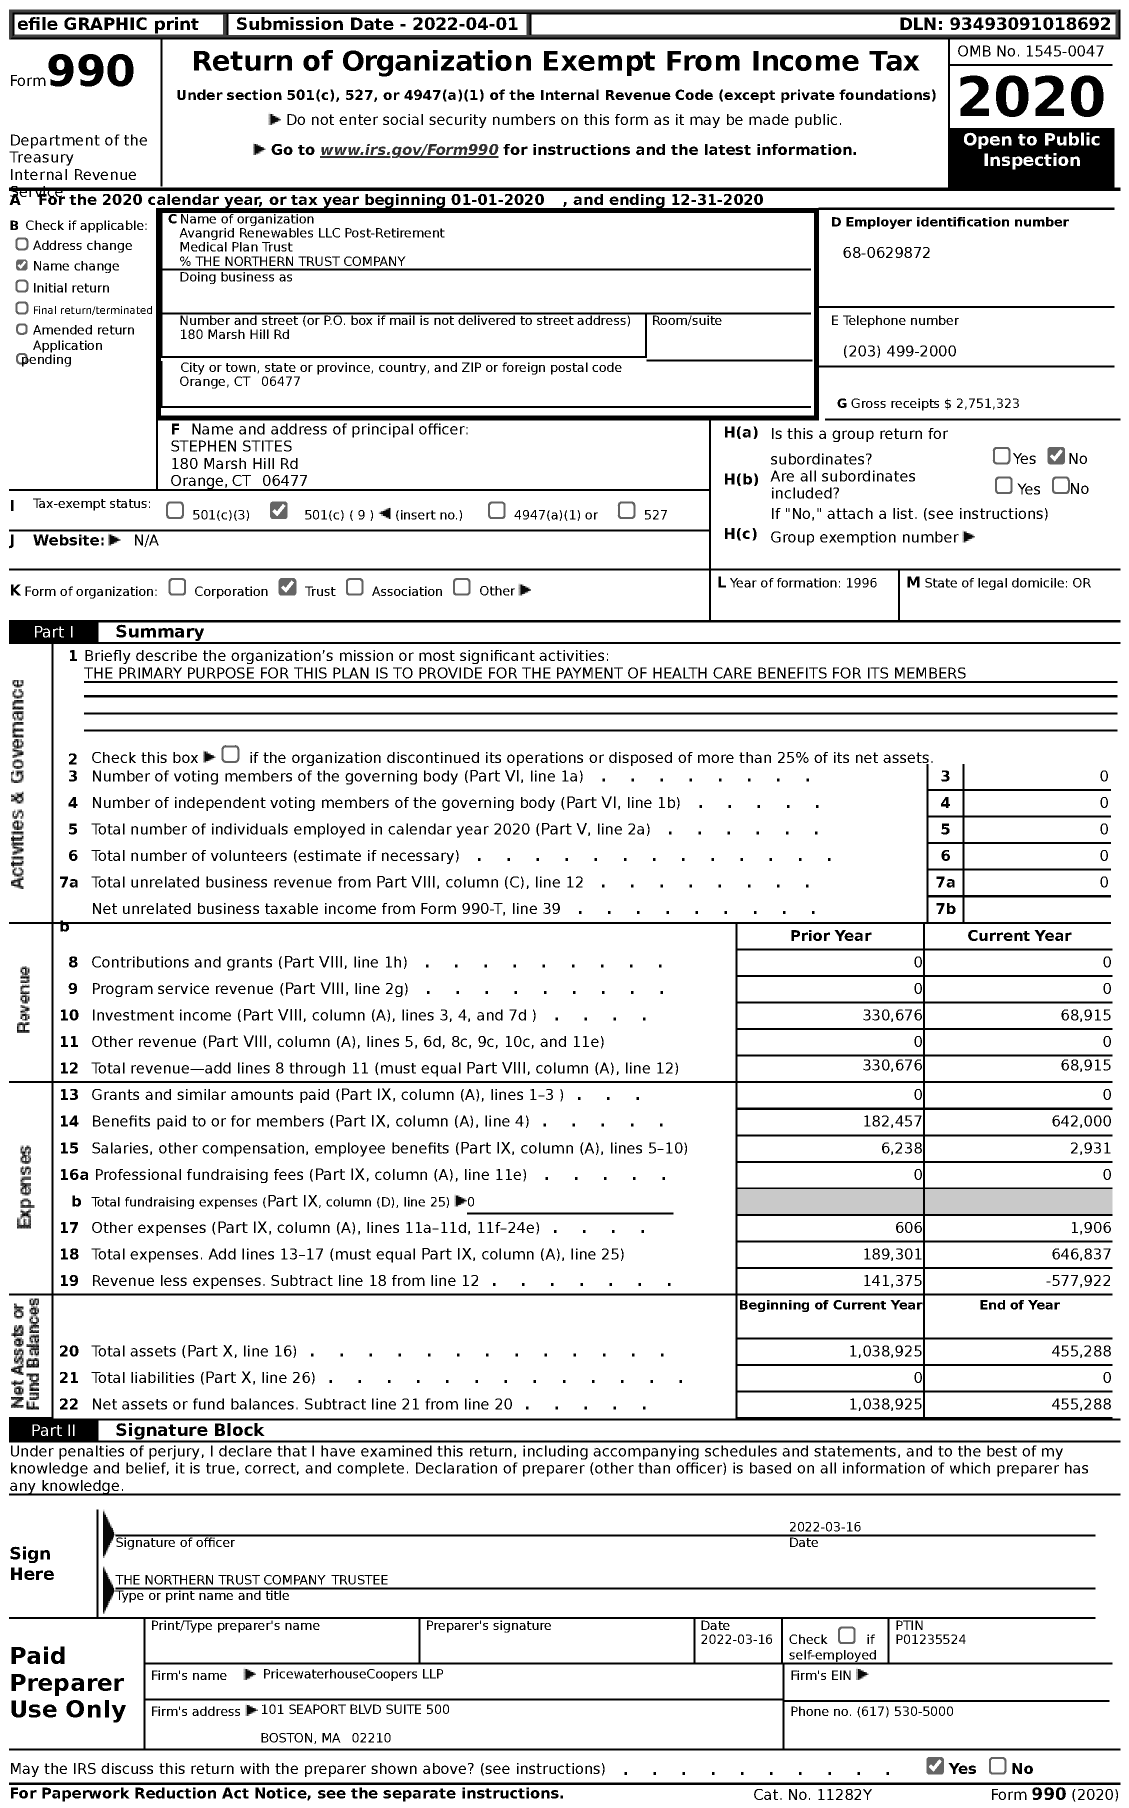 Image of first page of 2020 Form 990 for Avangrid Renewables LLC Post-Retirement Medical Plan Trust